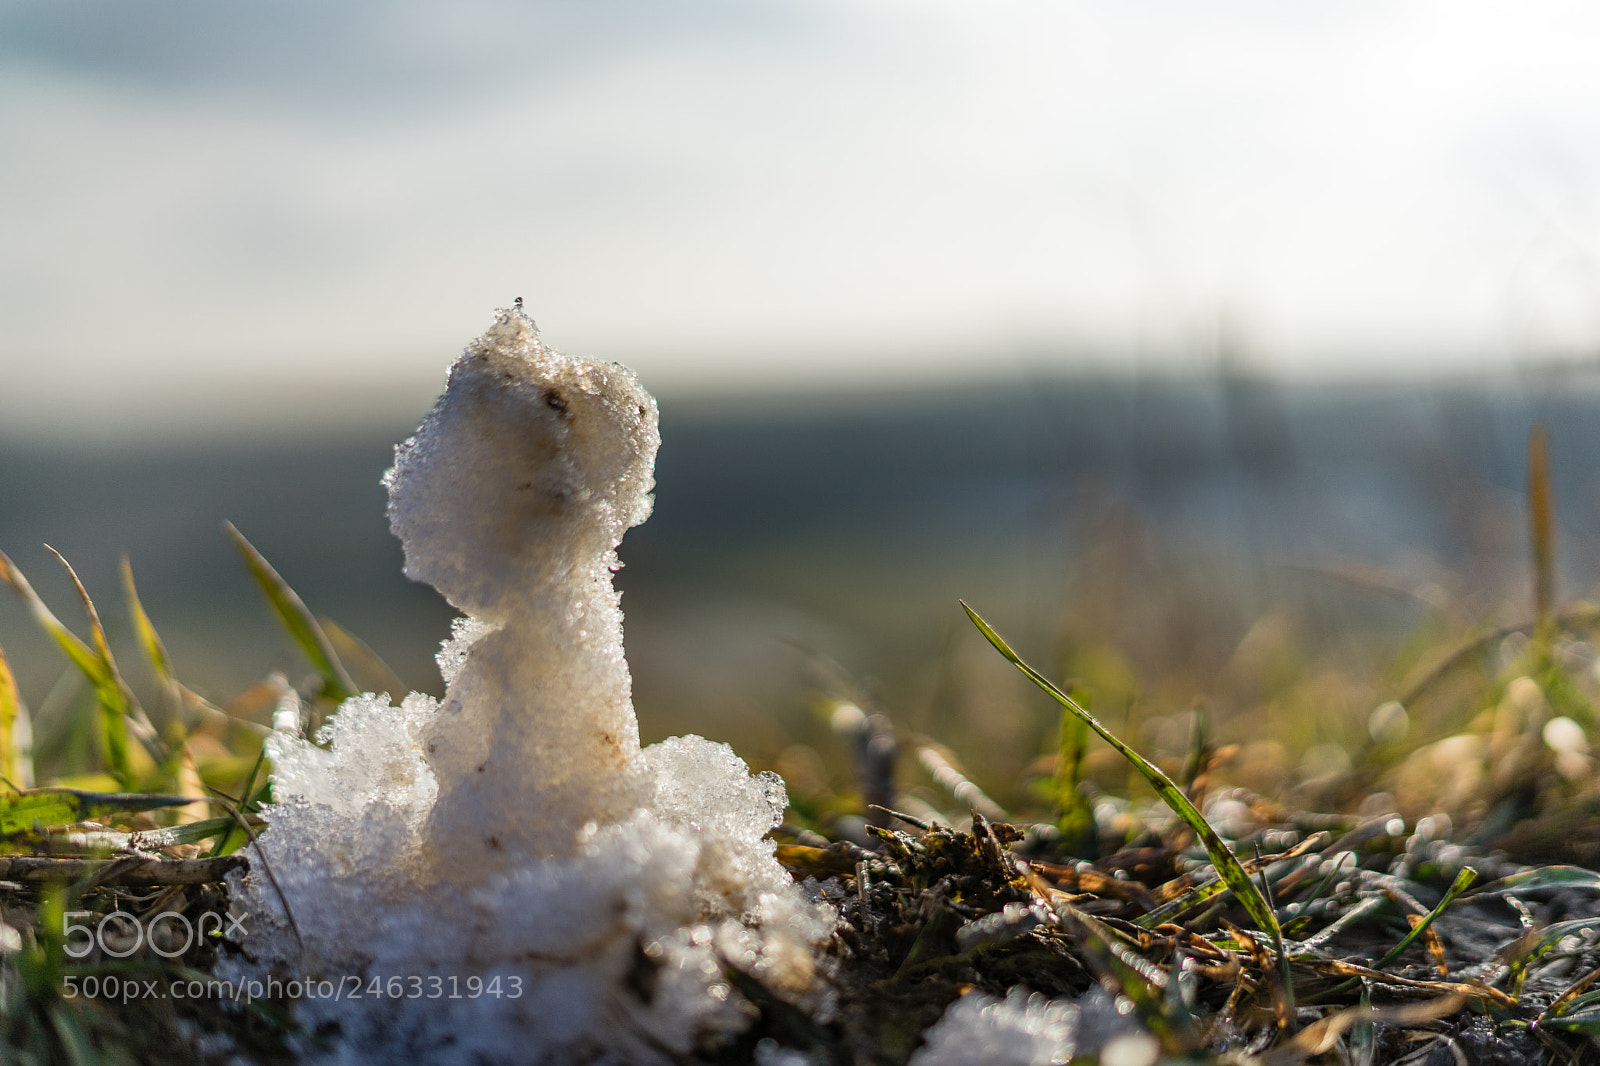 Sony a7 sample photo. Little snowman sitting in photography